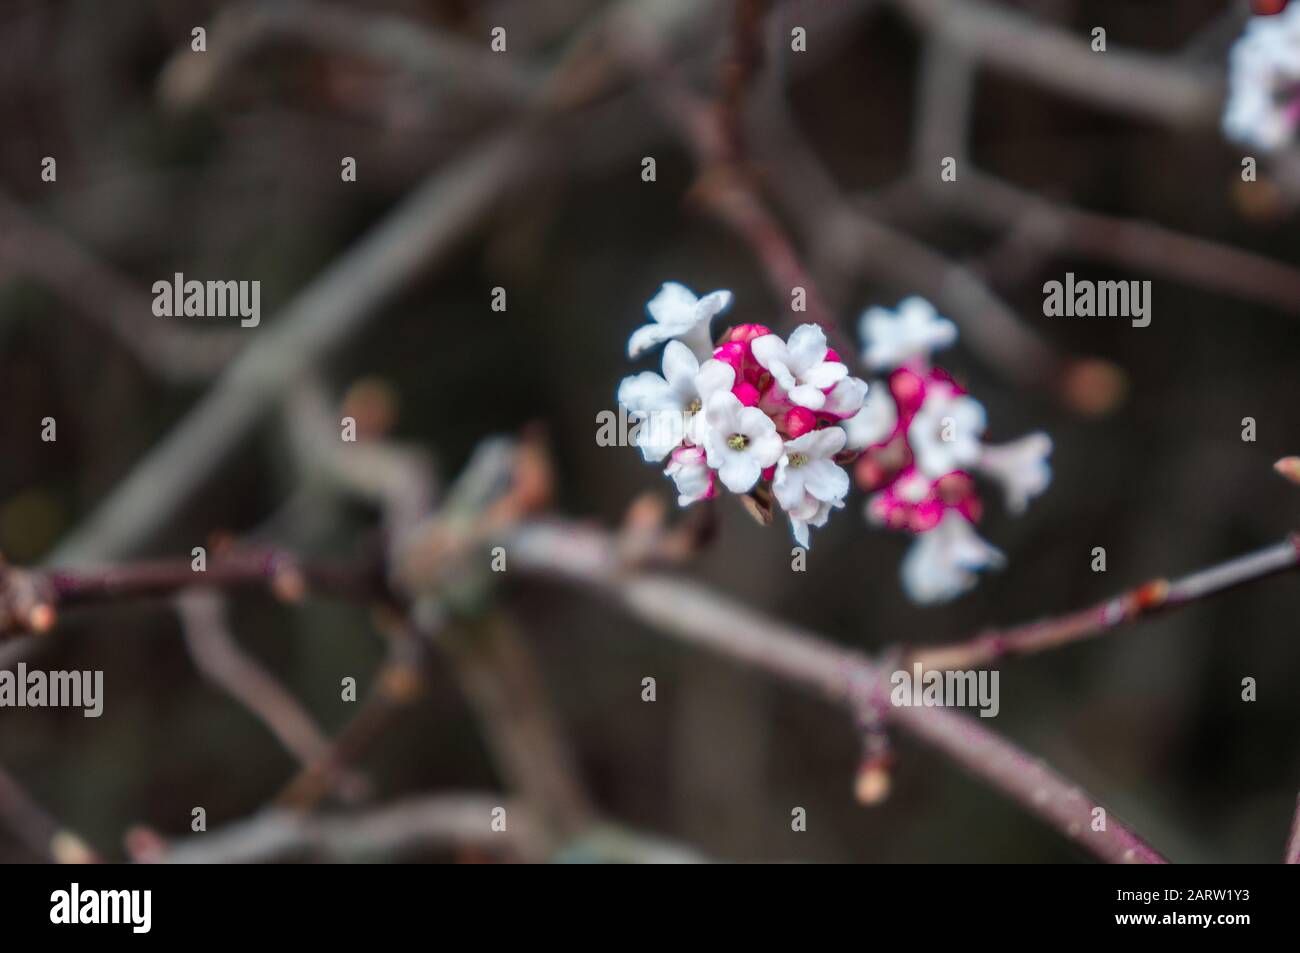 Close up of single small white and pink flower cluster with thin branches out of focus in the background. Shot on a bright spring day Stock Photo